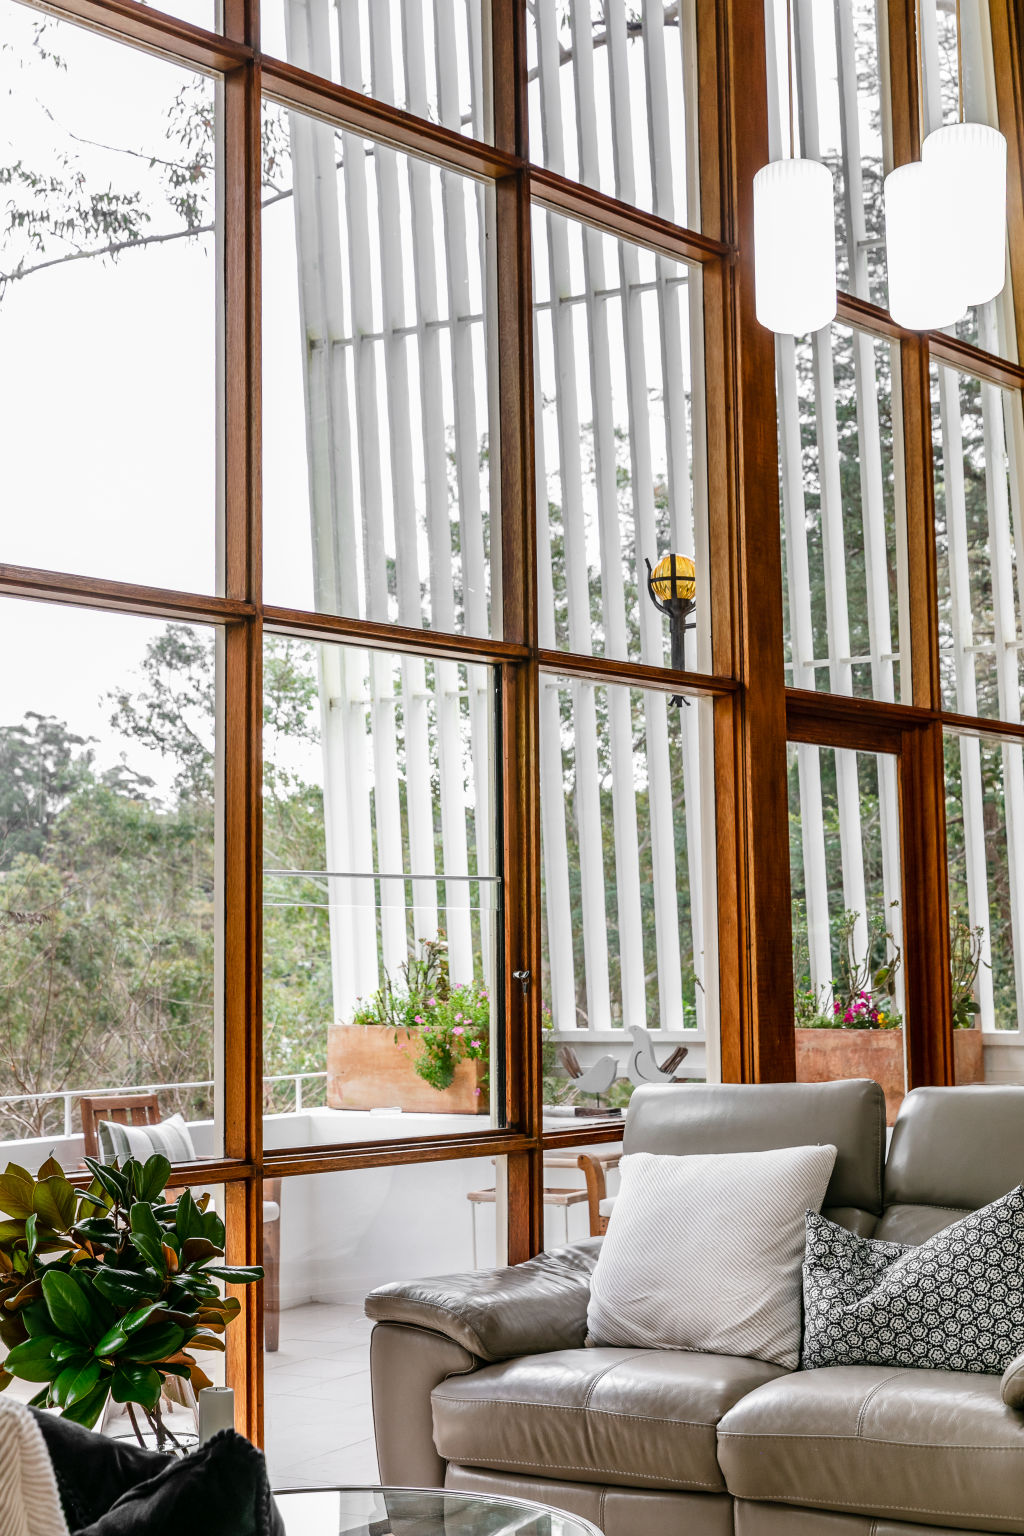 Much of the original mid-century charm remains intact. Photo: Moss & Co Photography